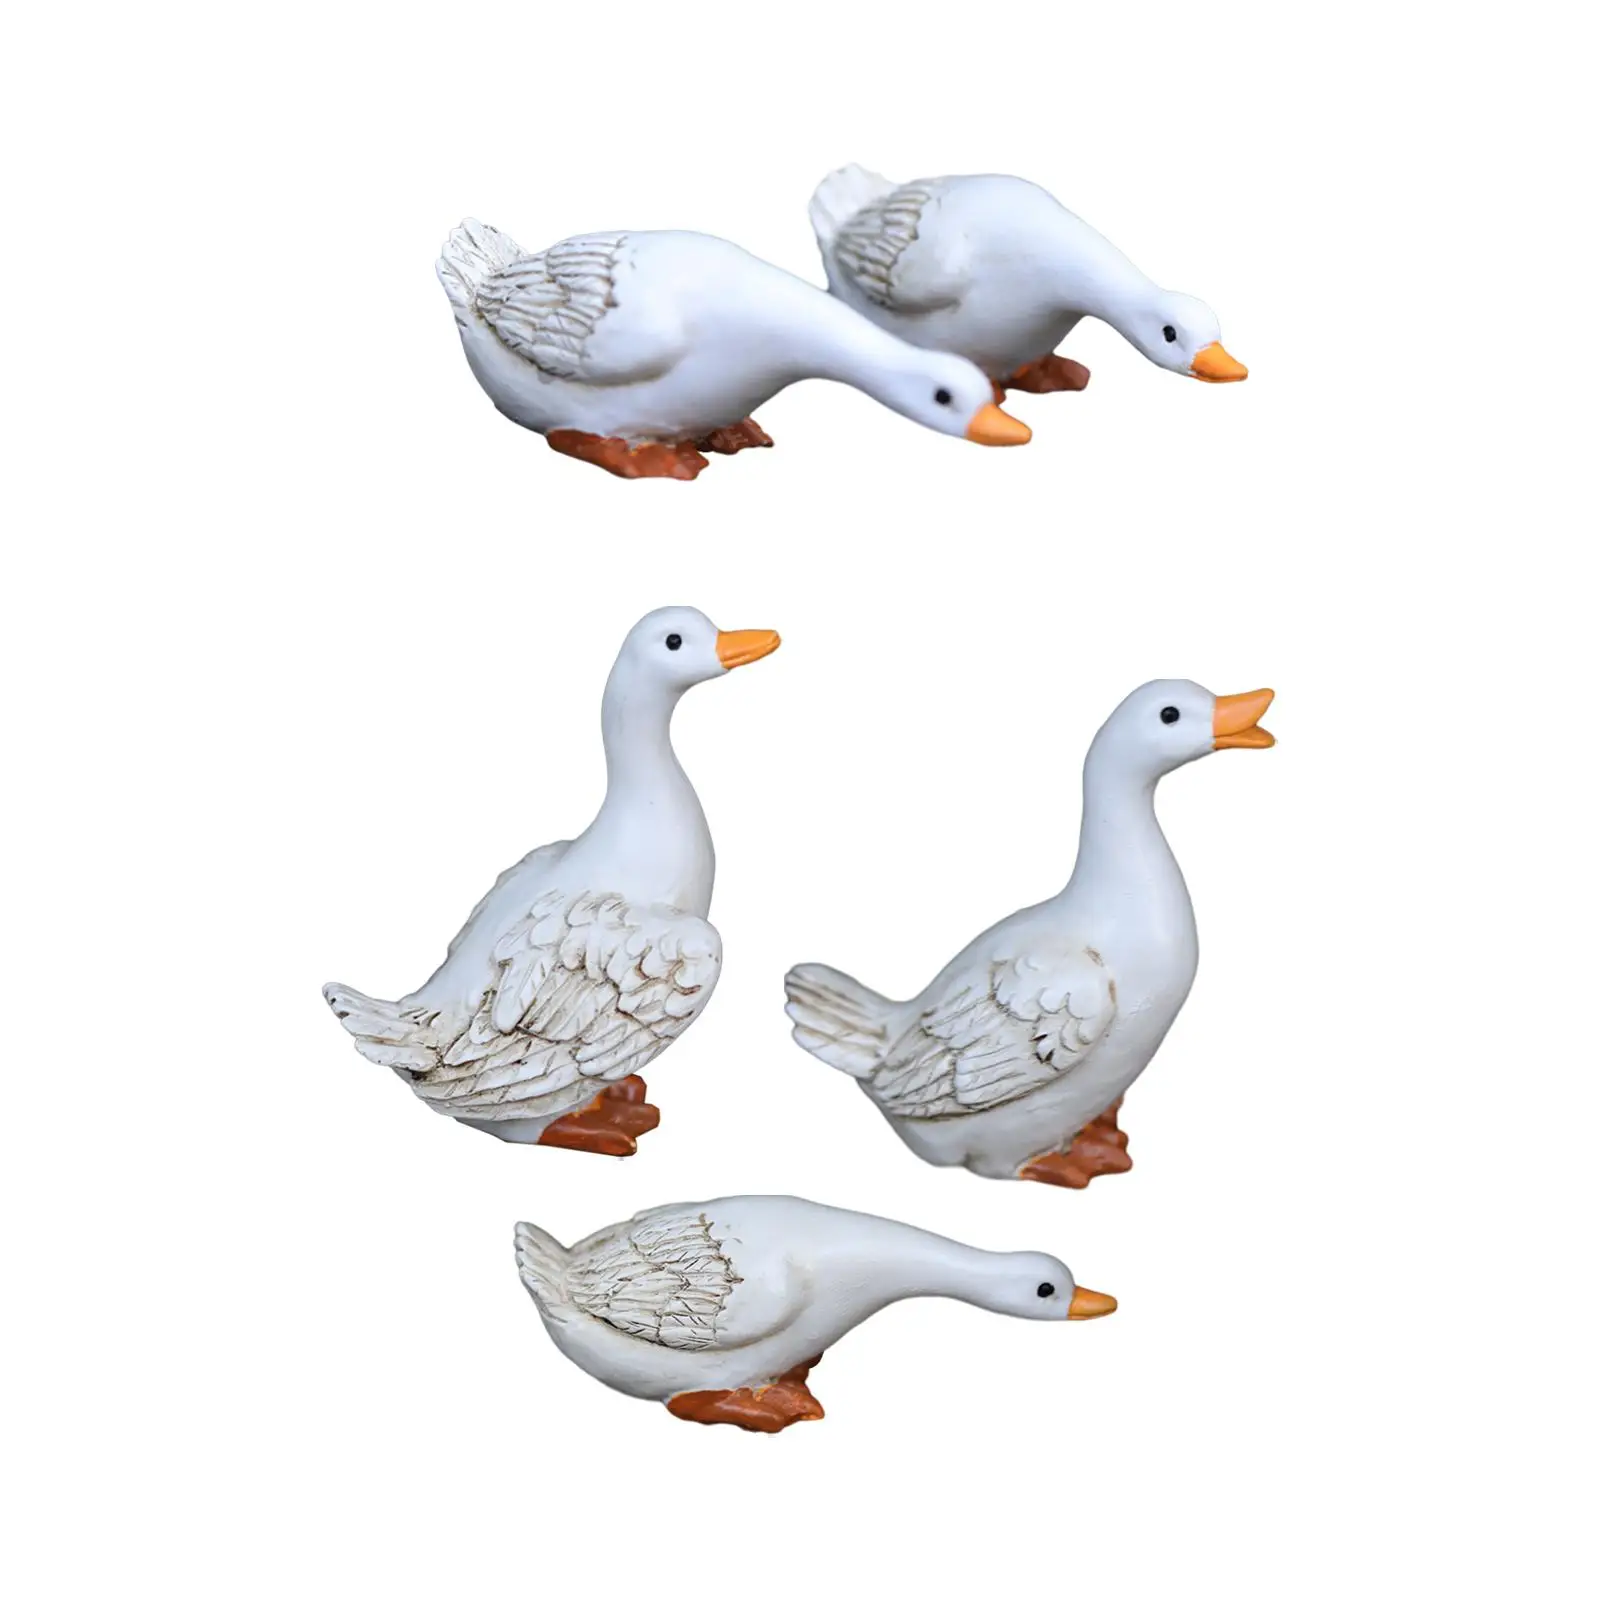 

Duck Statue Crafts Funny Home Decor Outdoor Duck Sculpture Backyard Pond Ducks Decoration for Patio Shelf Living Room Table Lawn